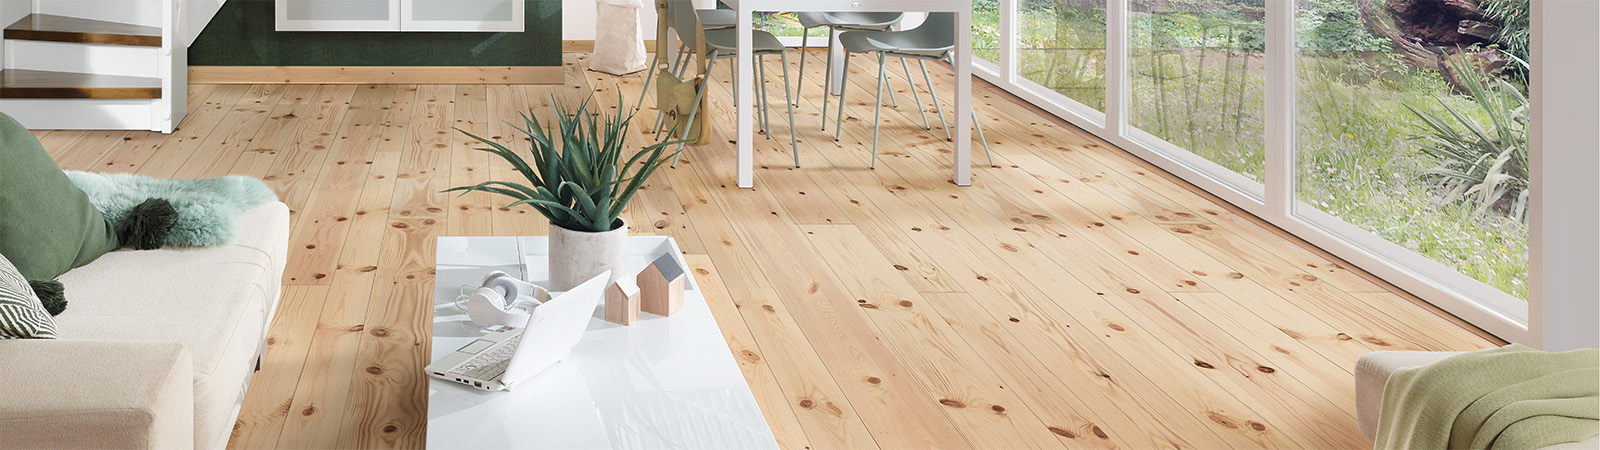 Osmo solid wood flooring in pine with a stain sheen adds warmth to your home.